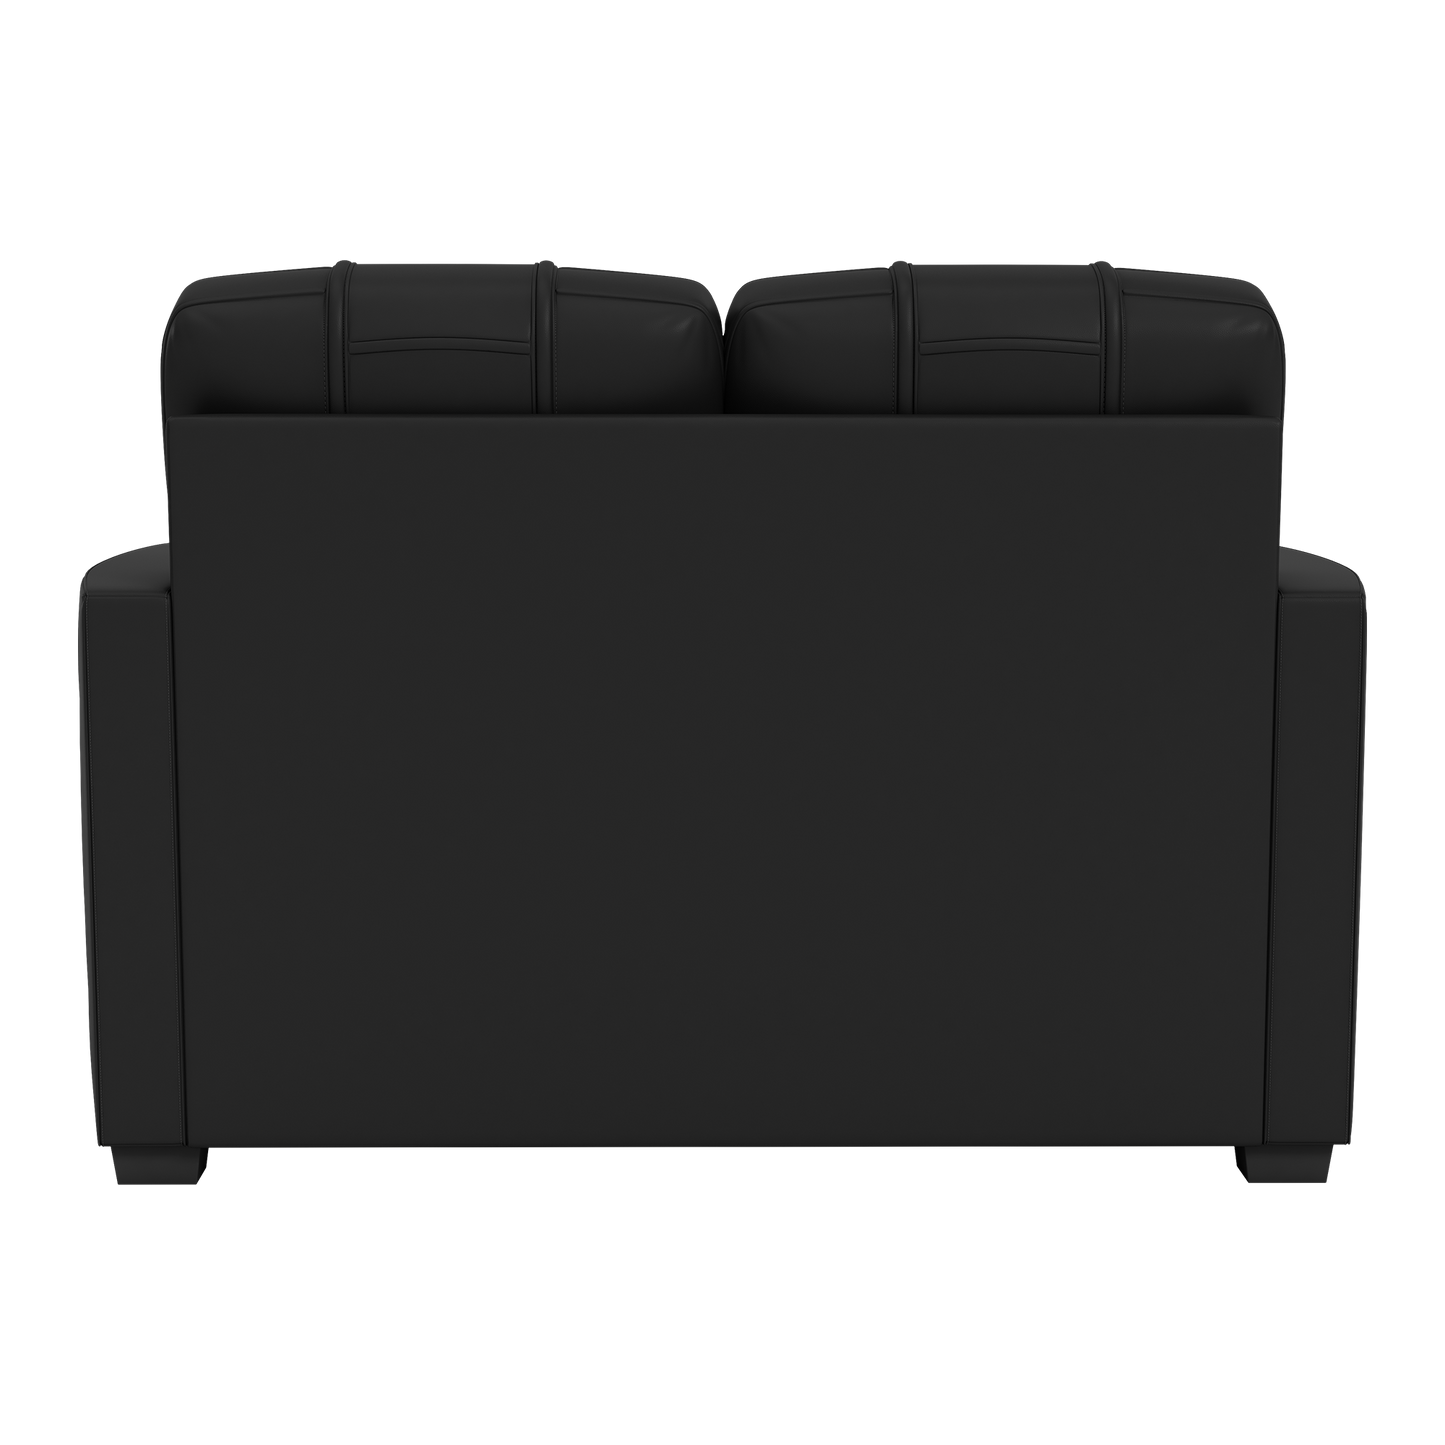 Silver Loveseat with Vegas Golden Knights with Secondary Logo